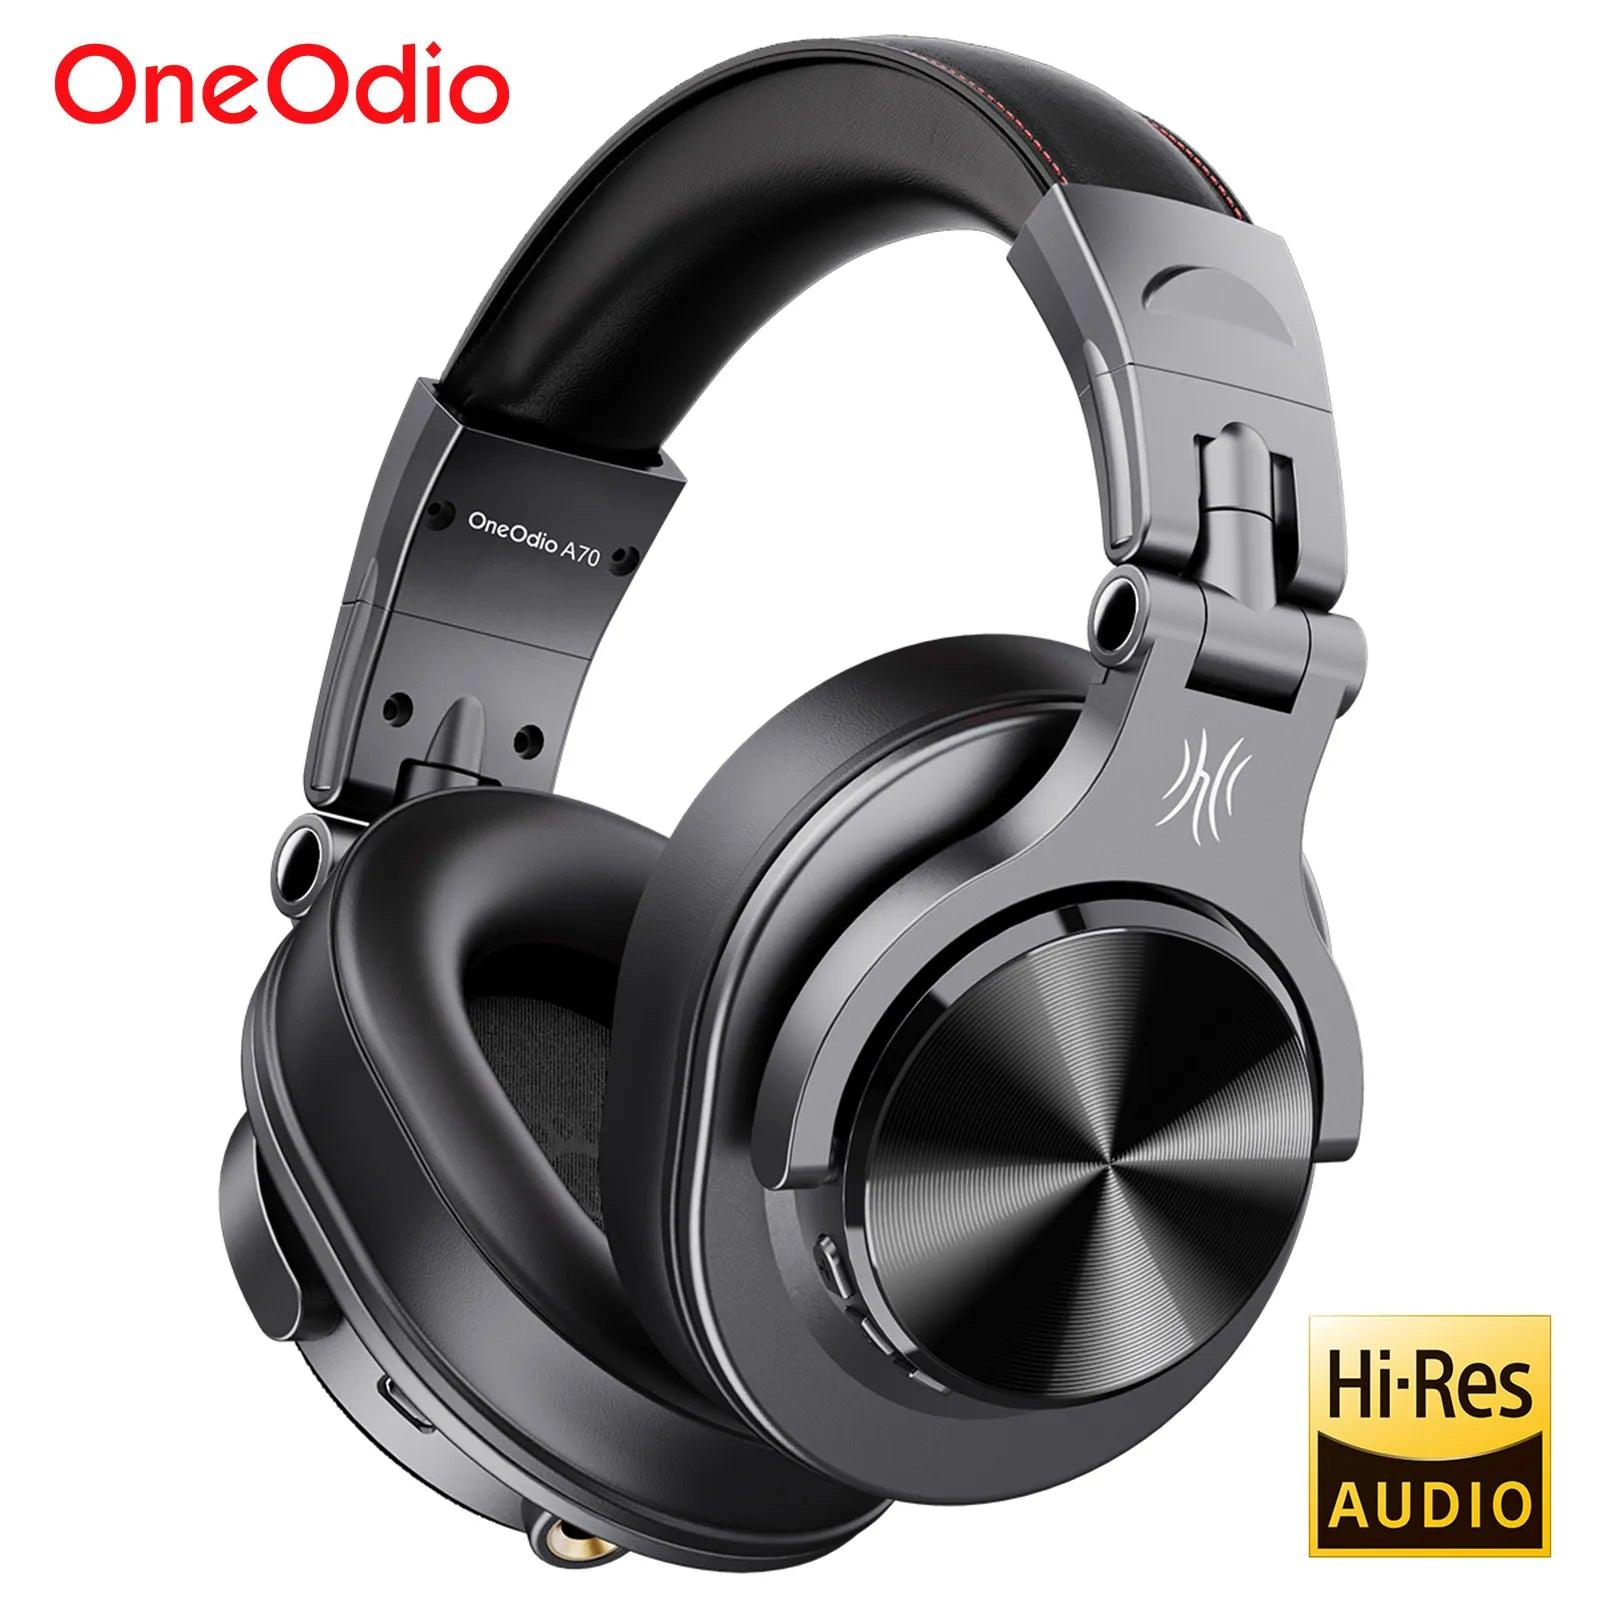 Oneodio Fusion A70 Wireless Bluetooth Headphones - Ultimate Hi-Res Audio Experience for DJs and Studio Monitoring  ourlum.com   